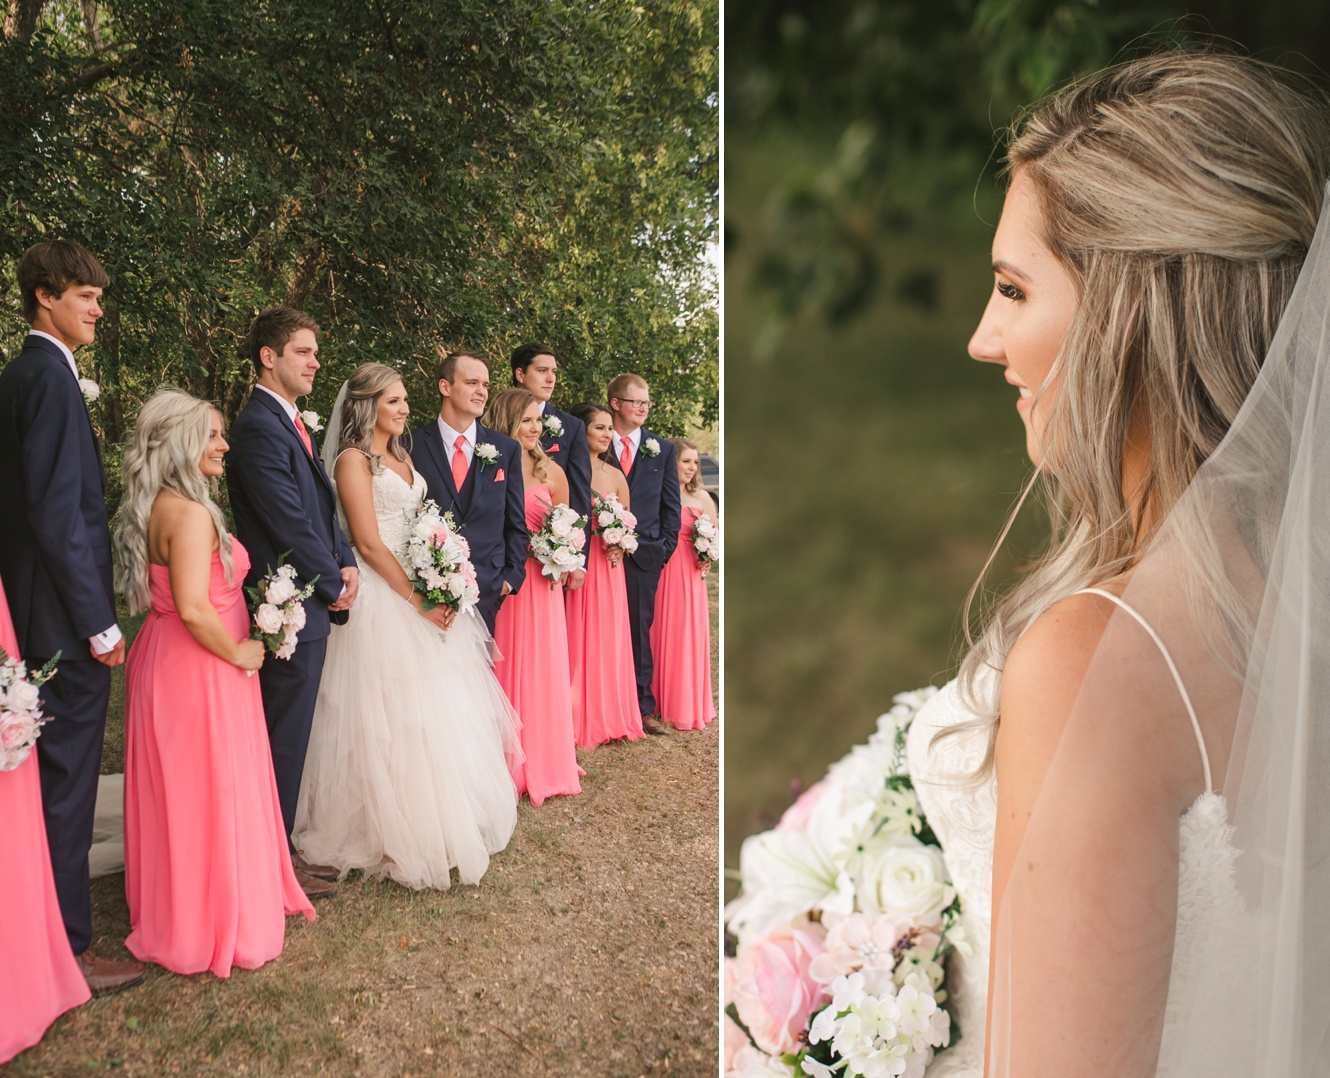 Coral and navy wedding colors photo